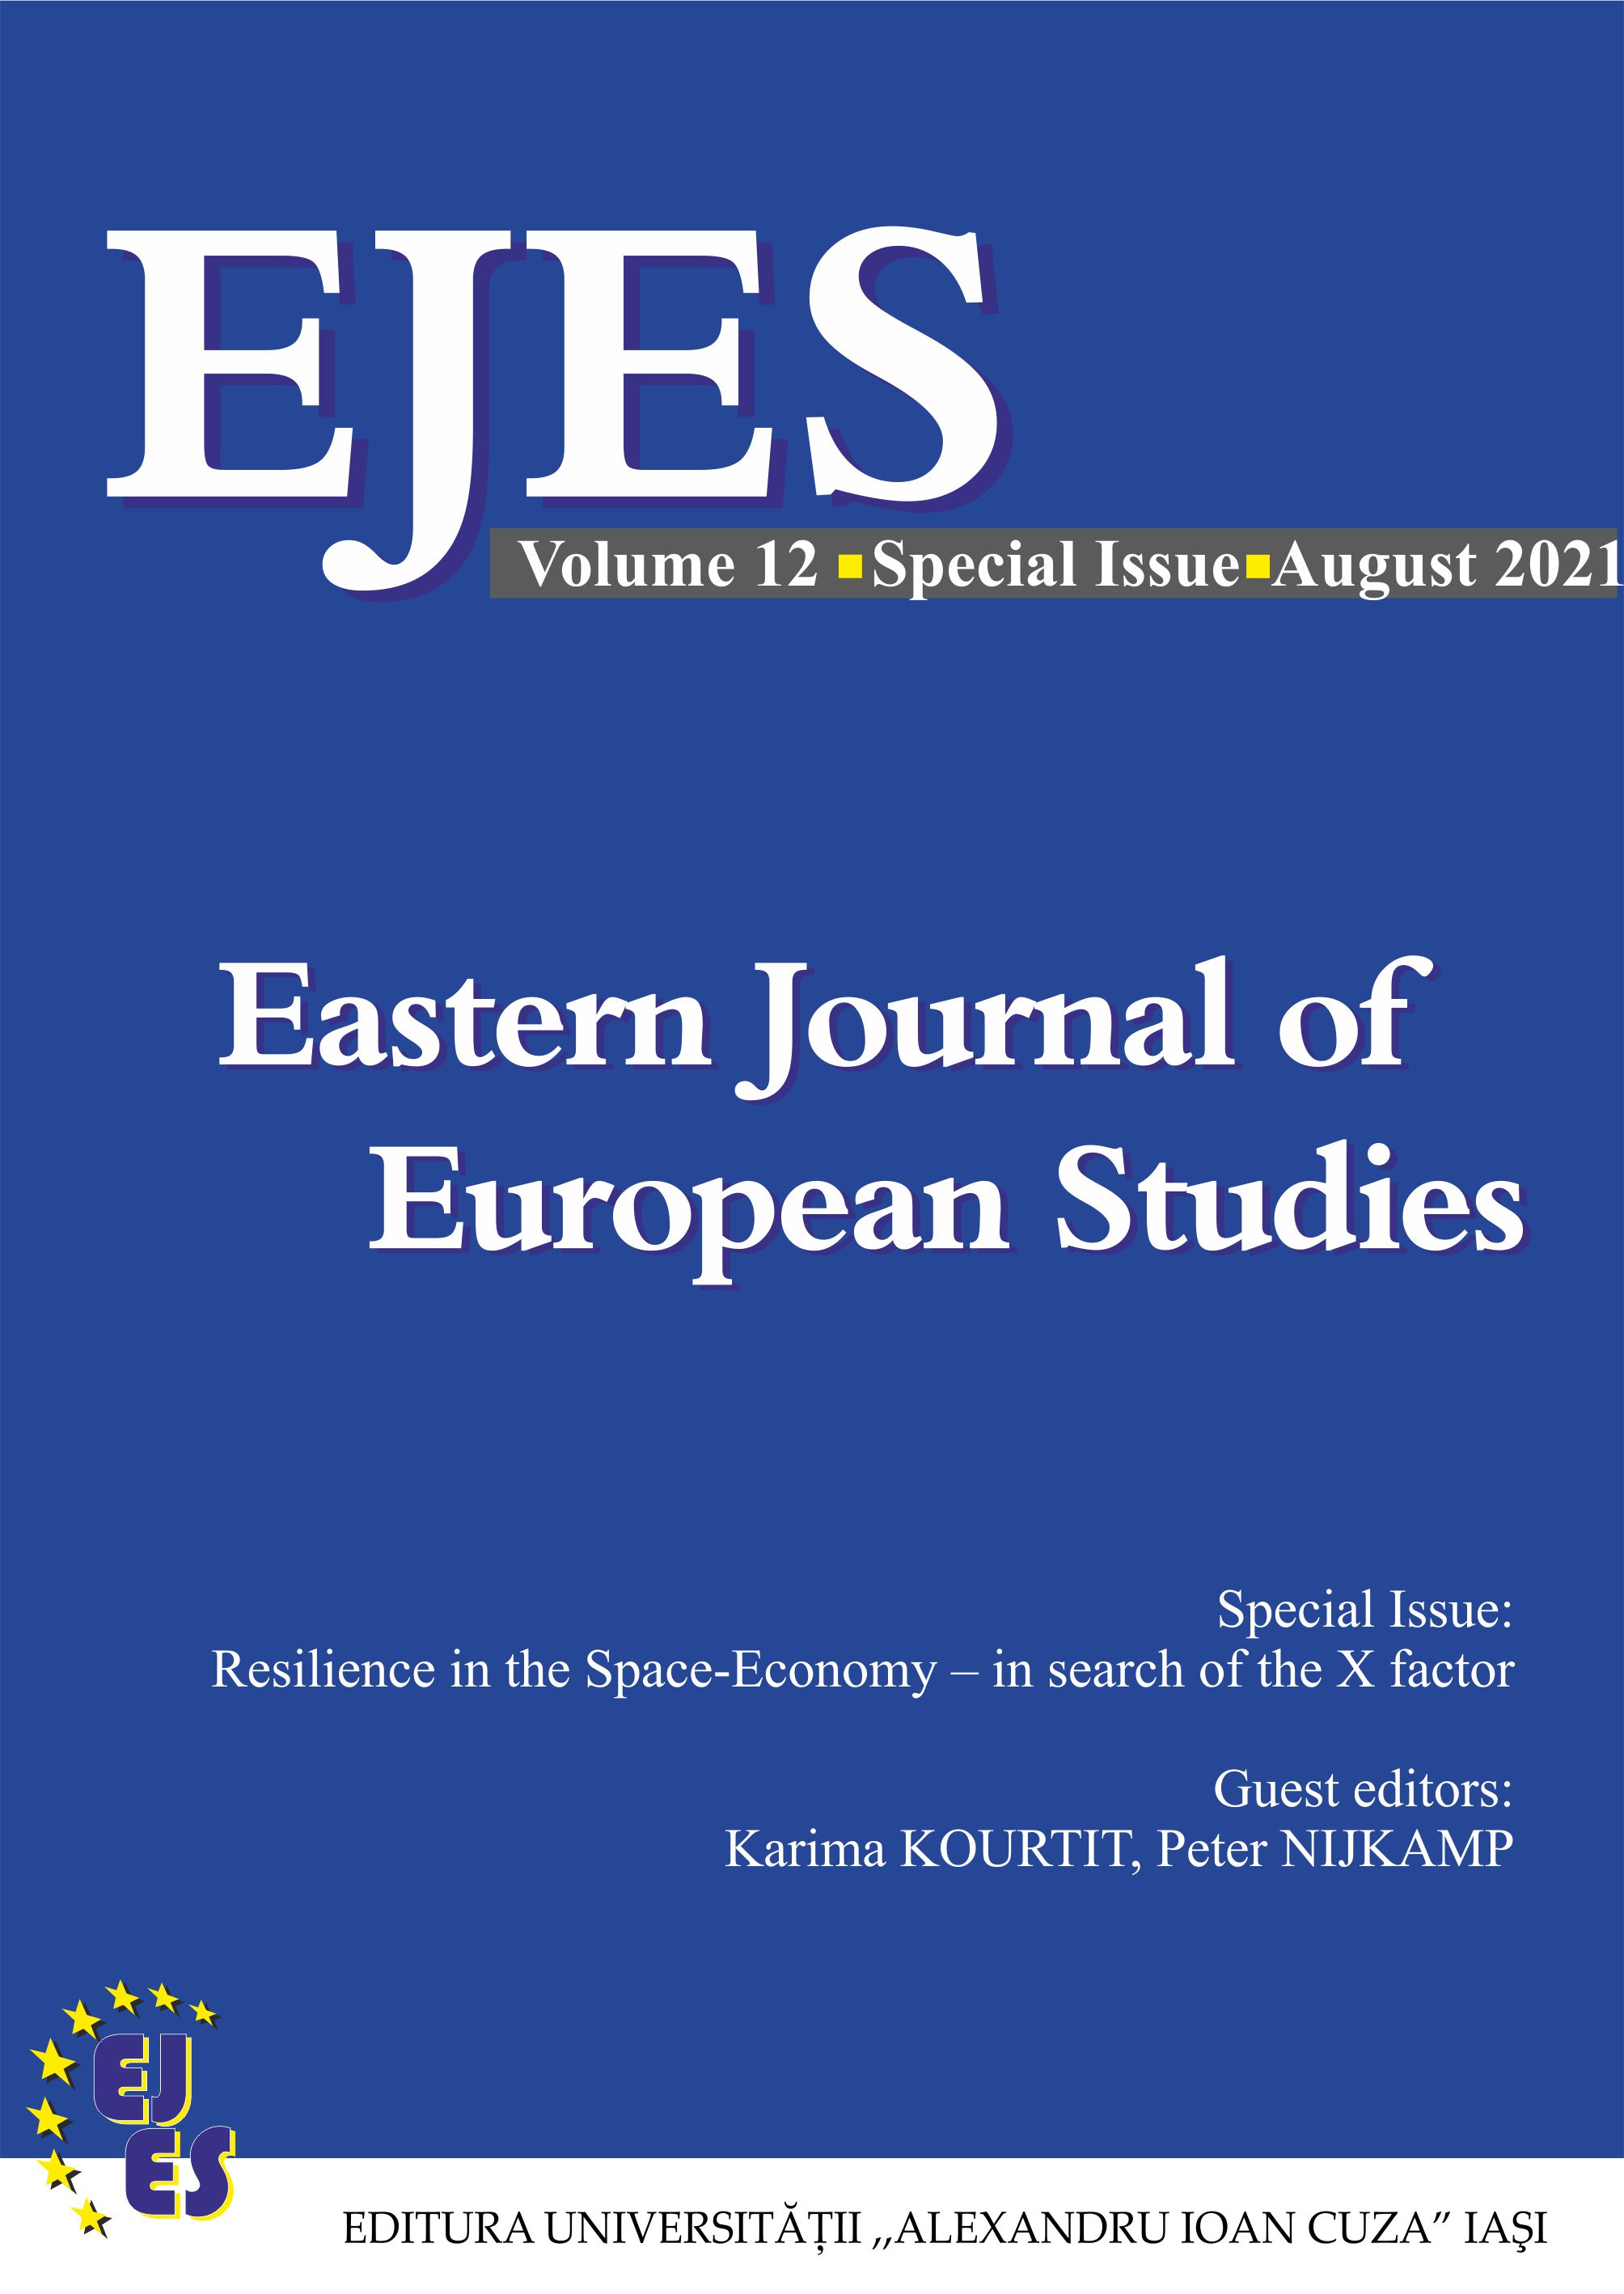 Urban resilience: an instrument to decode the post-socialist socio-economic and spatial transformations of cities from Central and Eastern Europe